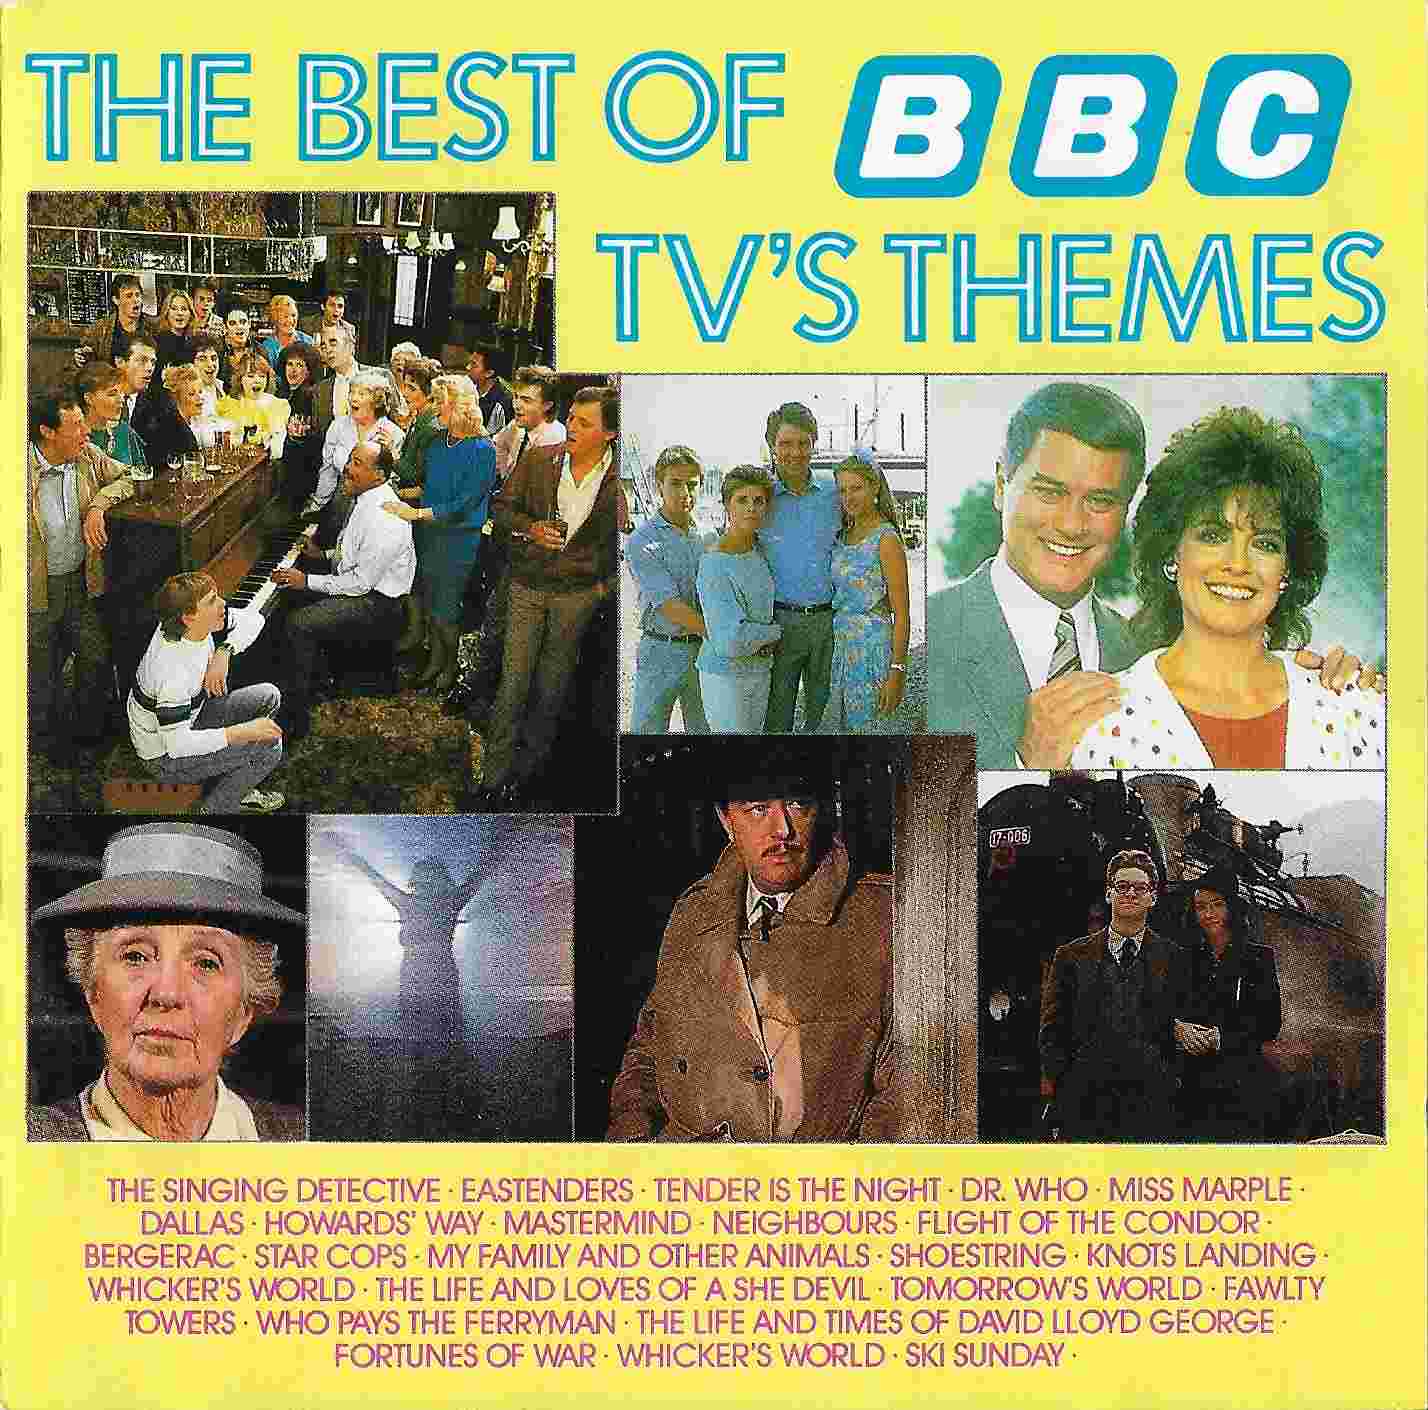 Picture of The best of BBC TV's themes by artist Various from the BBC cds - Records and Tapes library